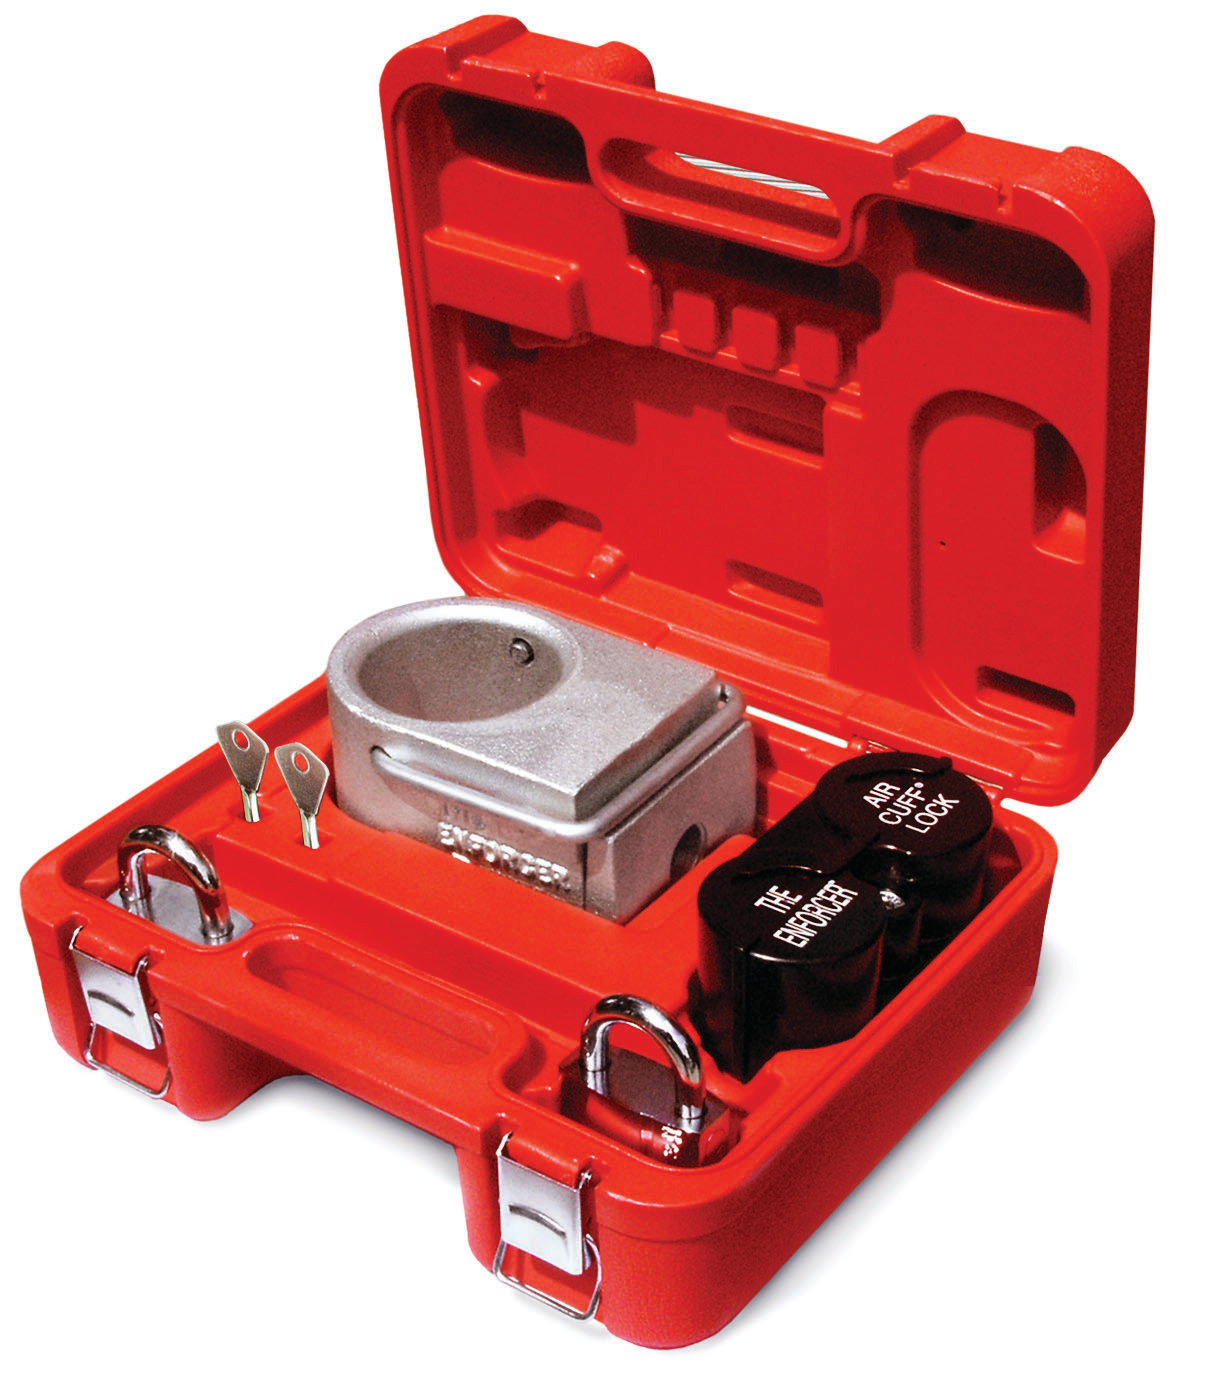 Abloy’s Enforcer Security Kit holds a kingpin lock, air cuff locks to secure air valve levers and prevent brake release, and advanced padlocks.